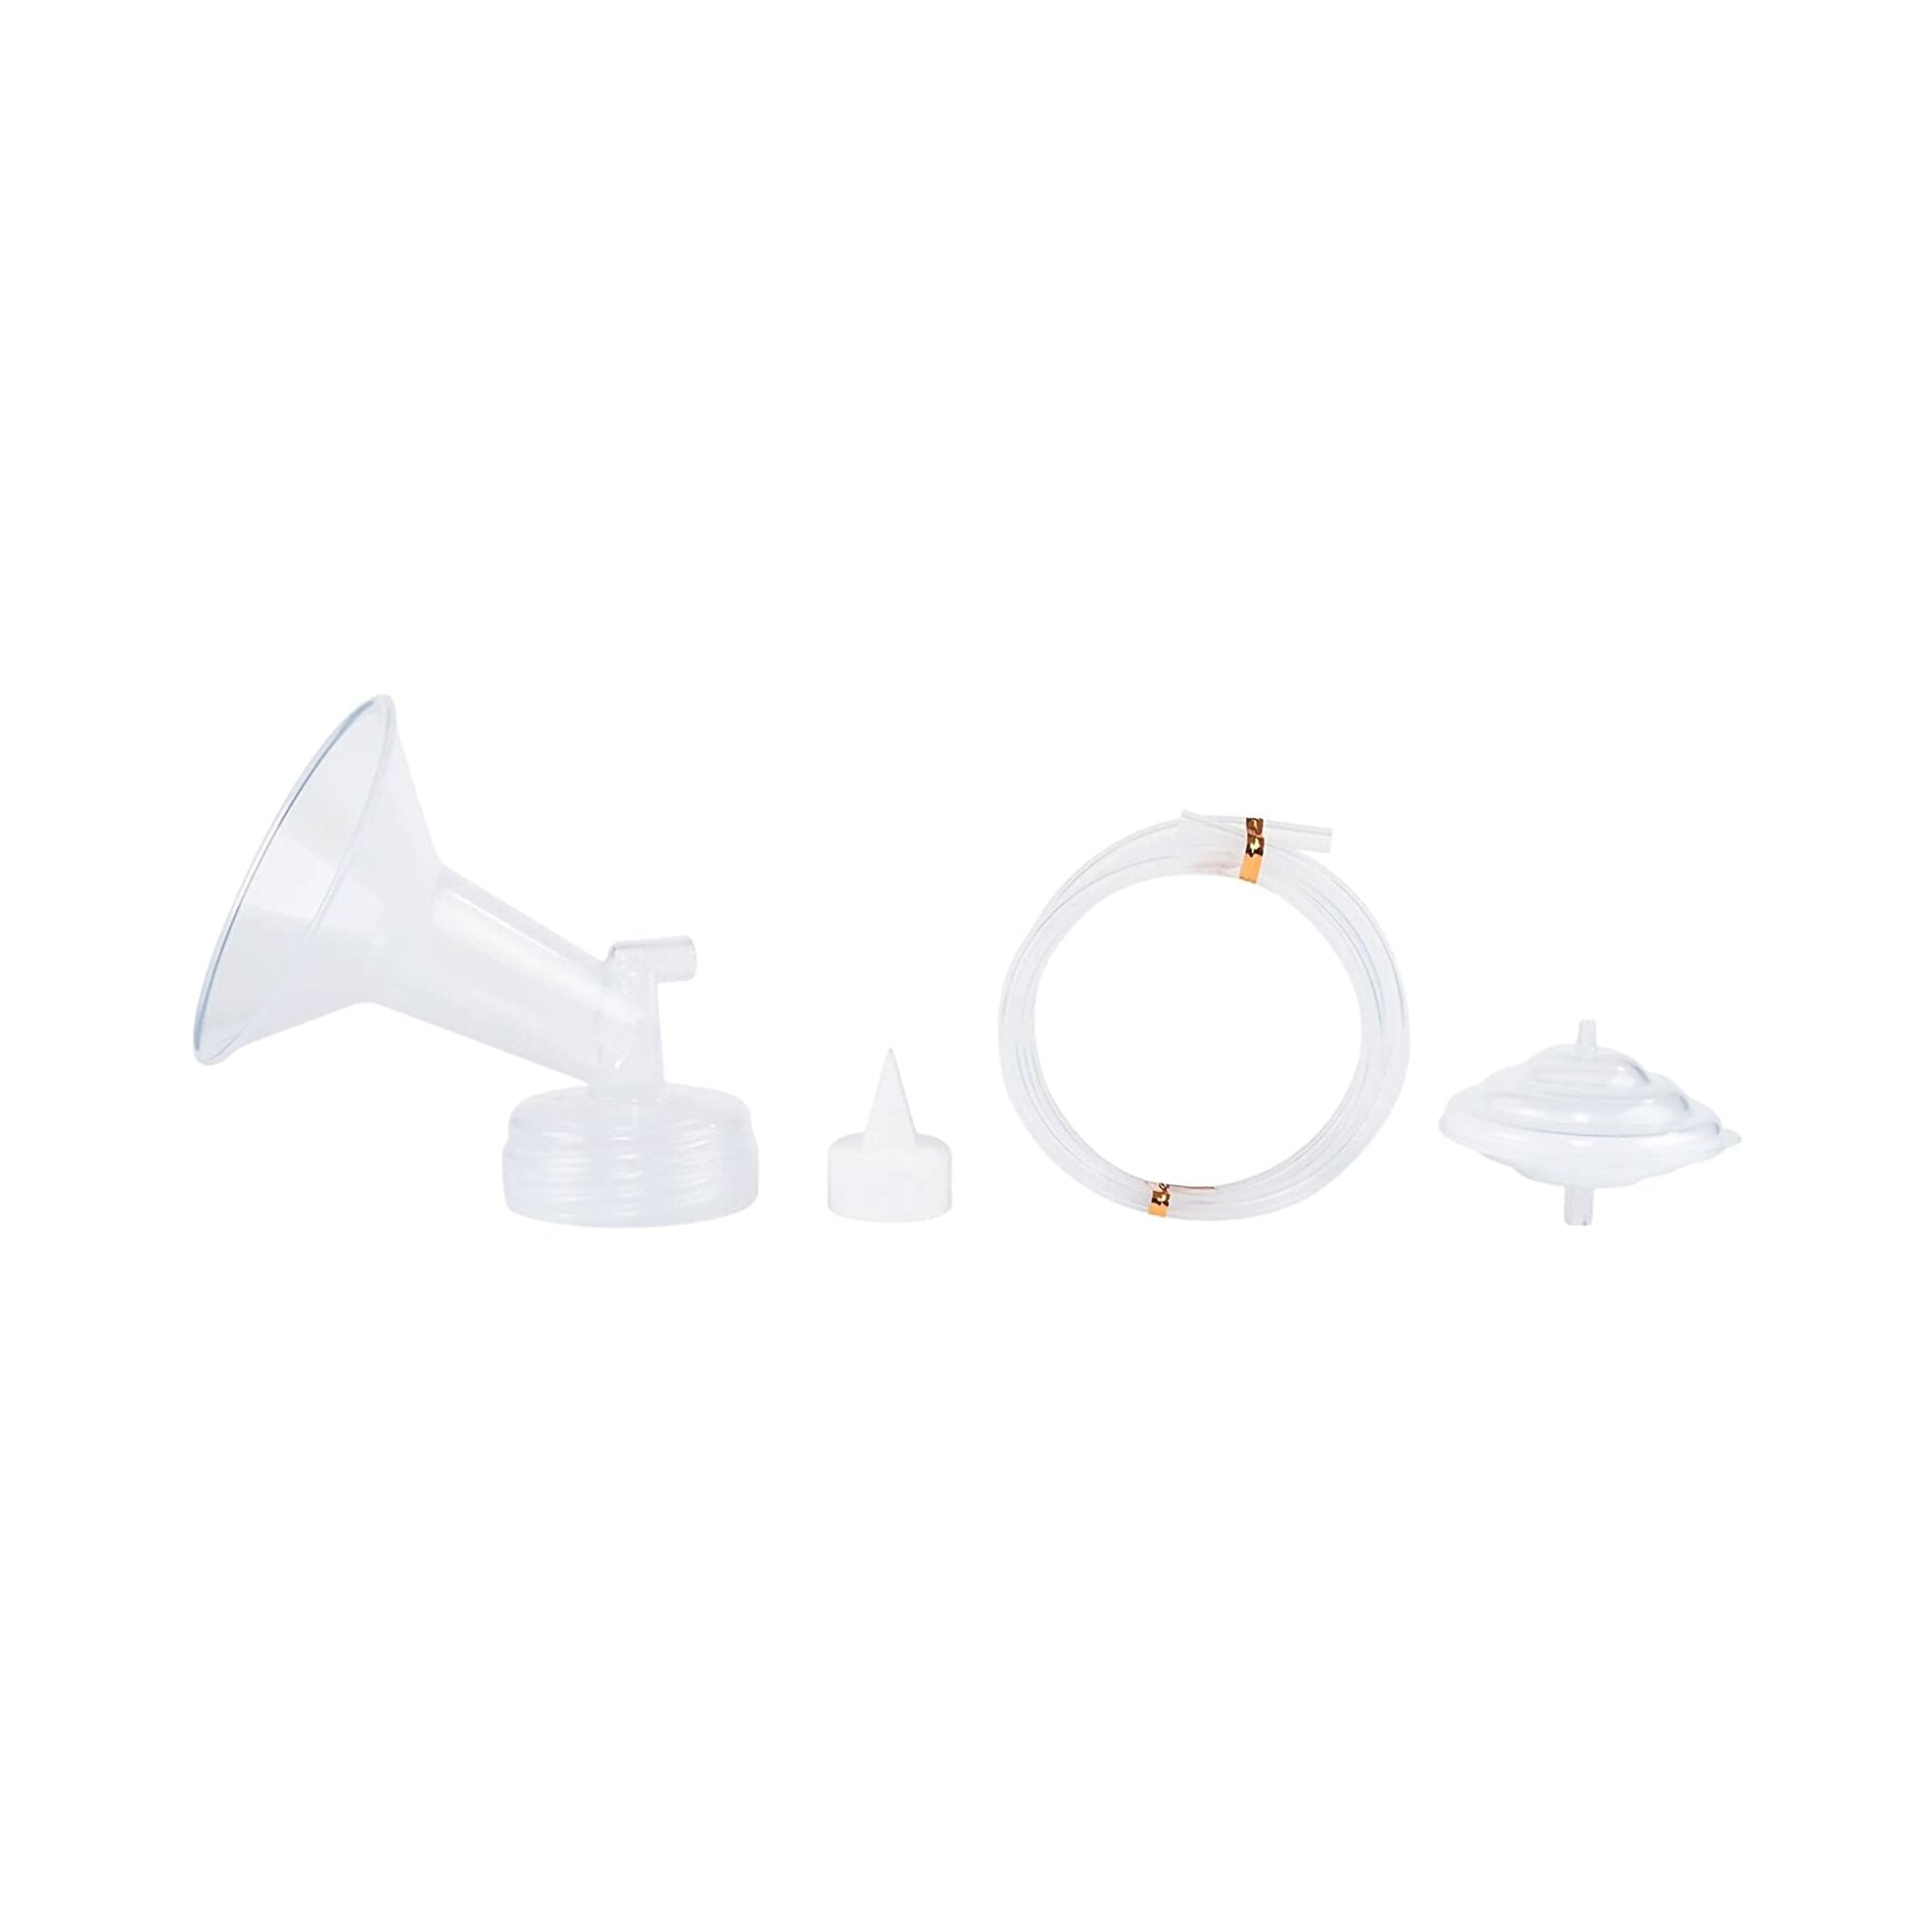 Flange Kit Spectra® For Spectra S2, S1, S9, M1 Breast Pumps